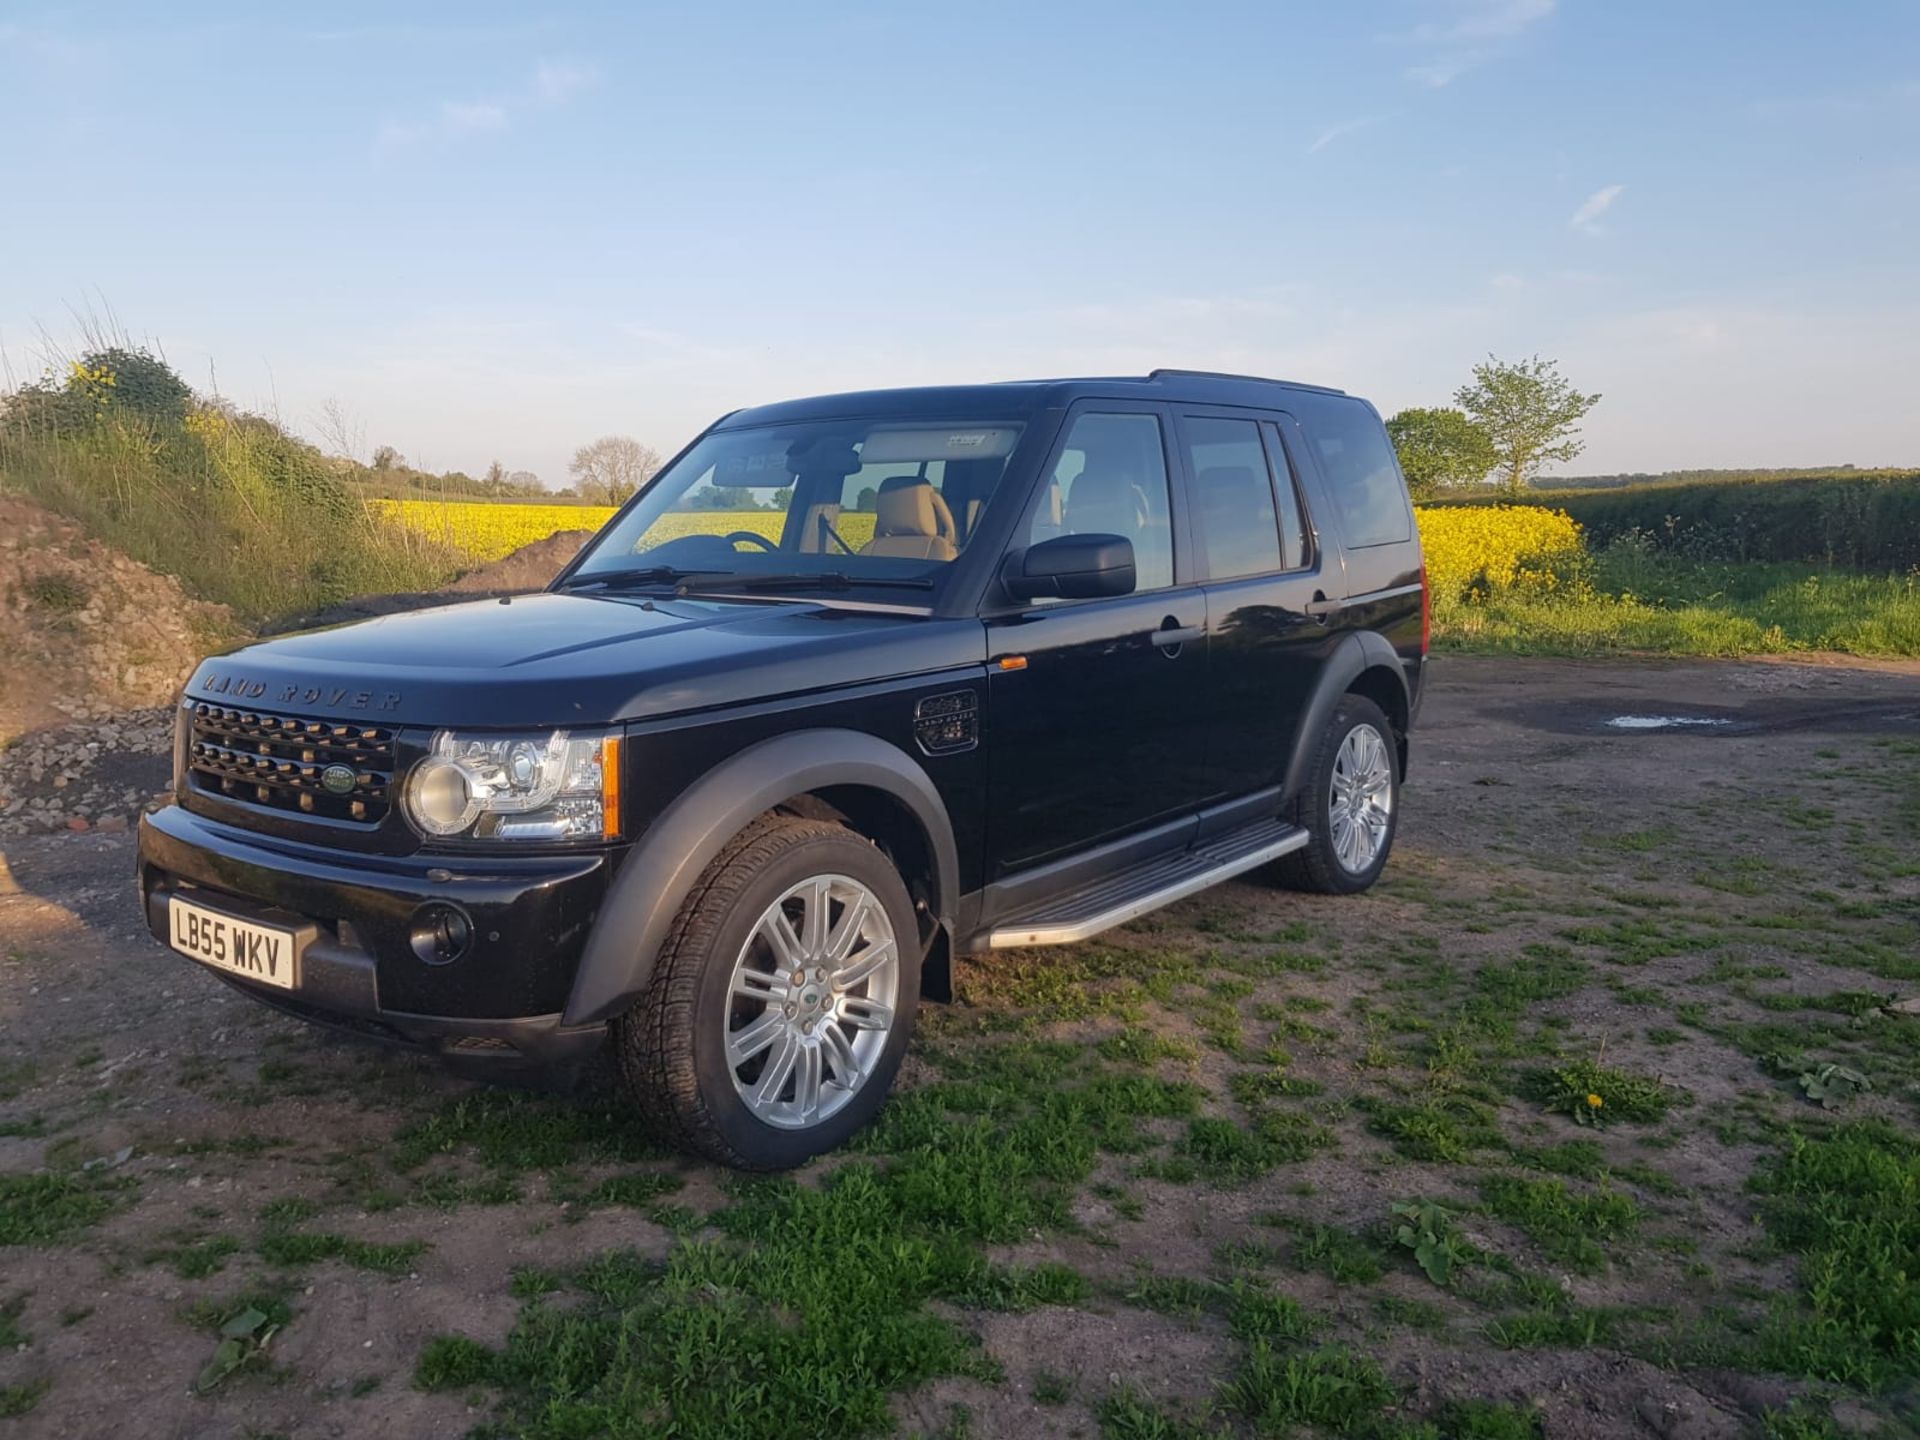 2006/55 REG LAND ROVER DISCOVERY 3 TDV6 AUTO 2.7 DIESEL BLACK 7 SEATER *NO VAT* - Image 3 of 12